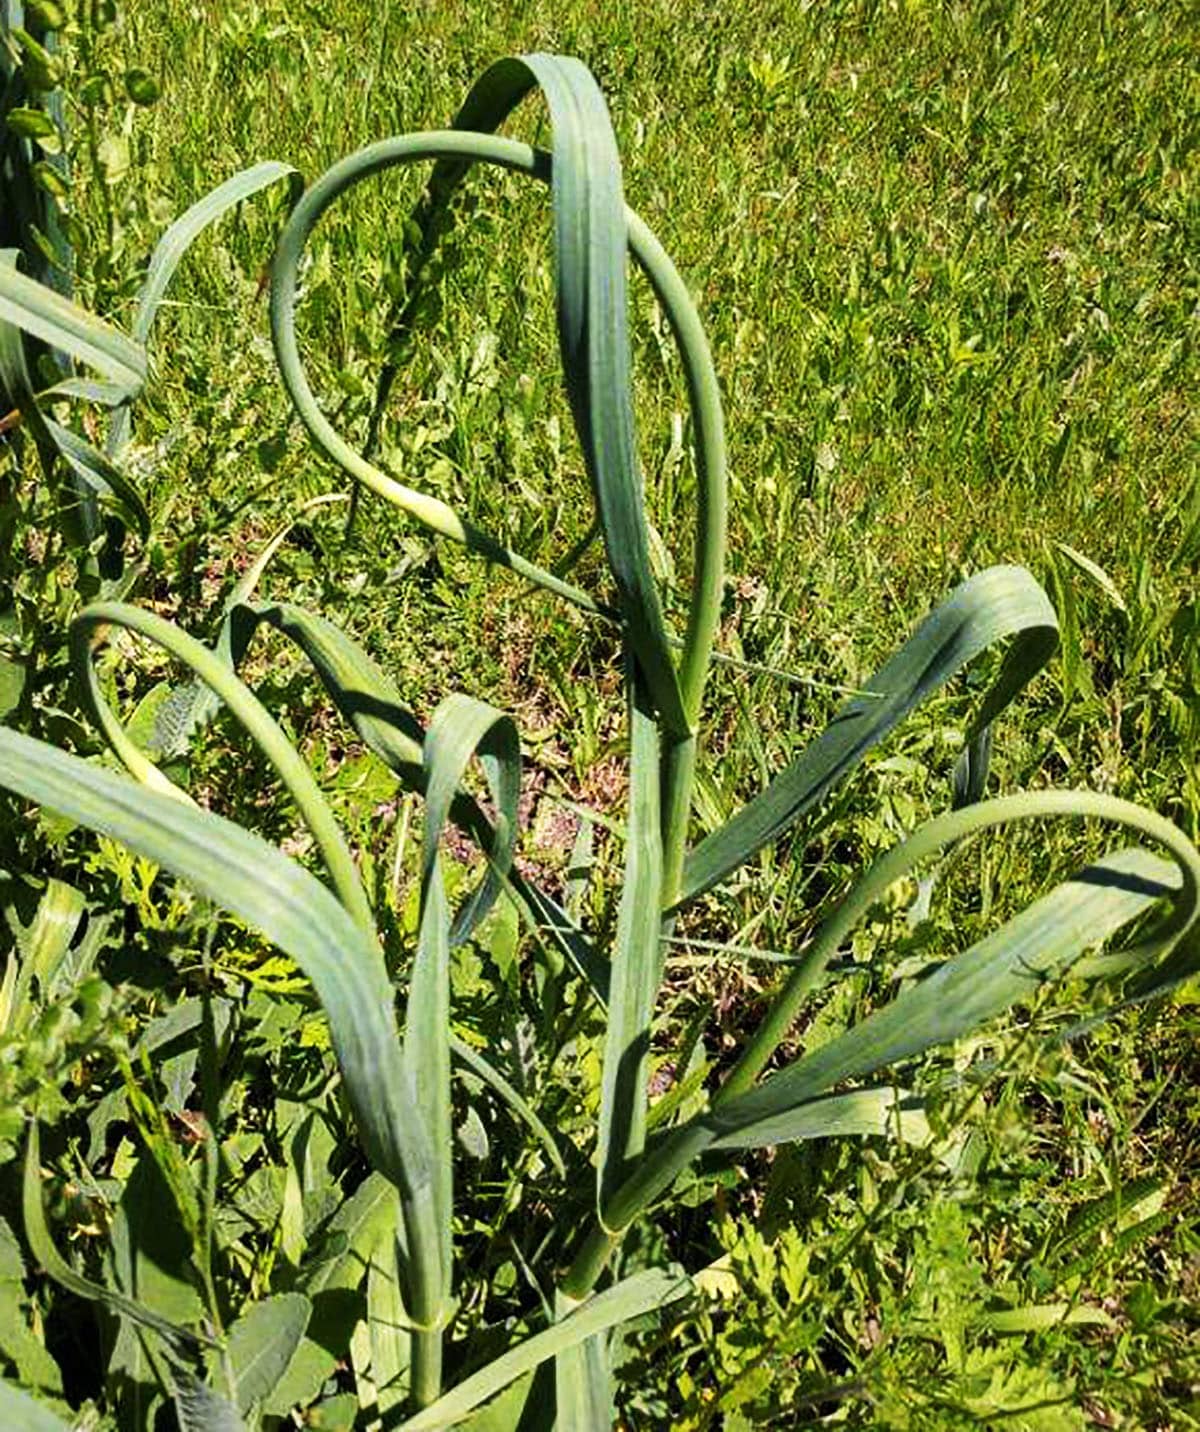 Garlic scapes growing in the yard.